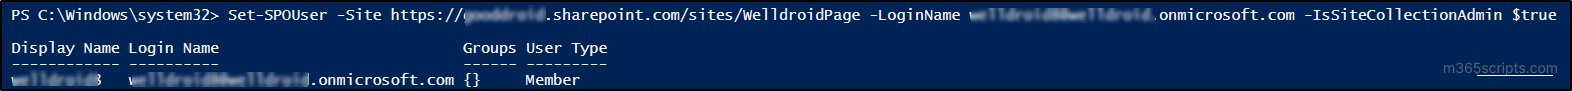 Add a User to Site Collection Administrators Group Using PowerShell